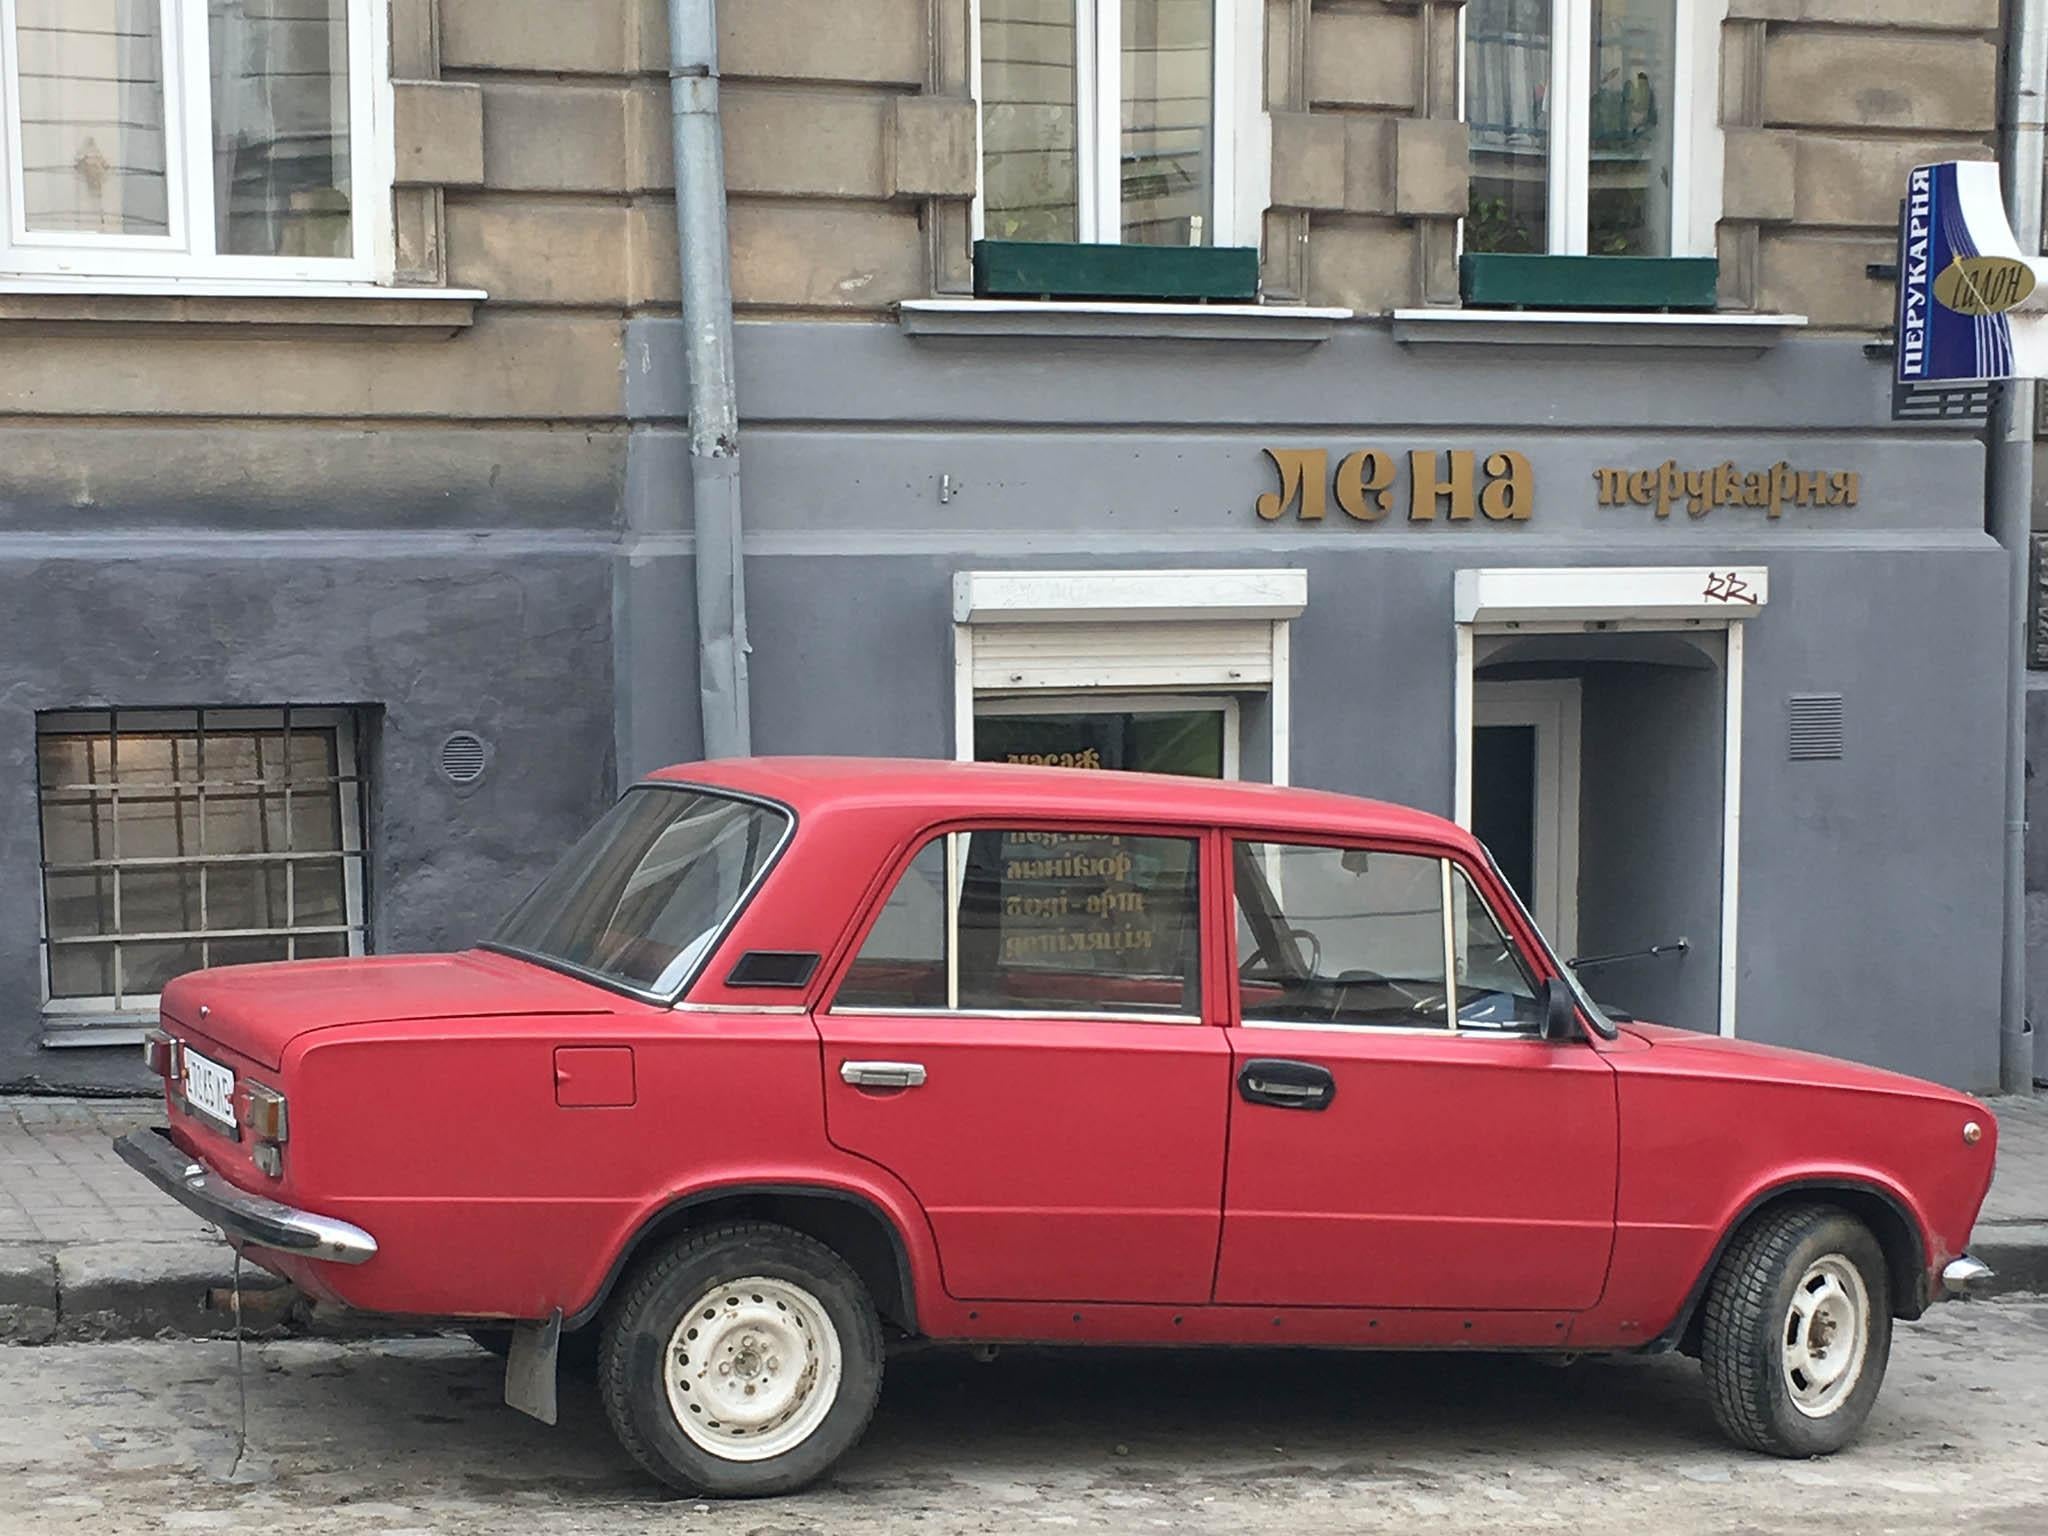 The old Russian Lada cars are dotted around the cobbled streets